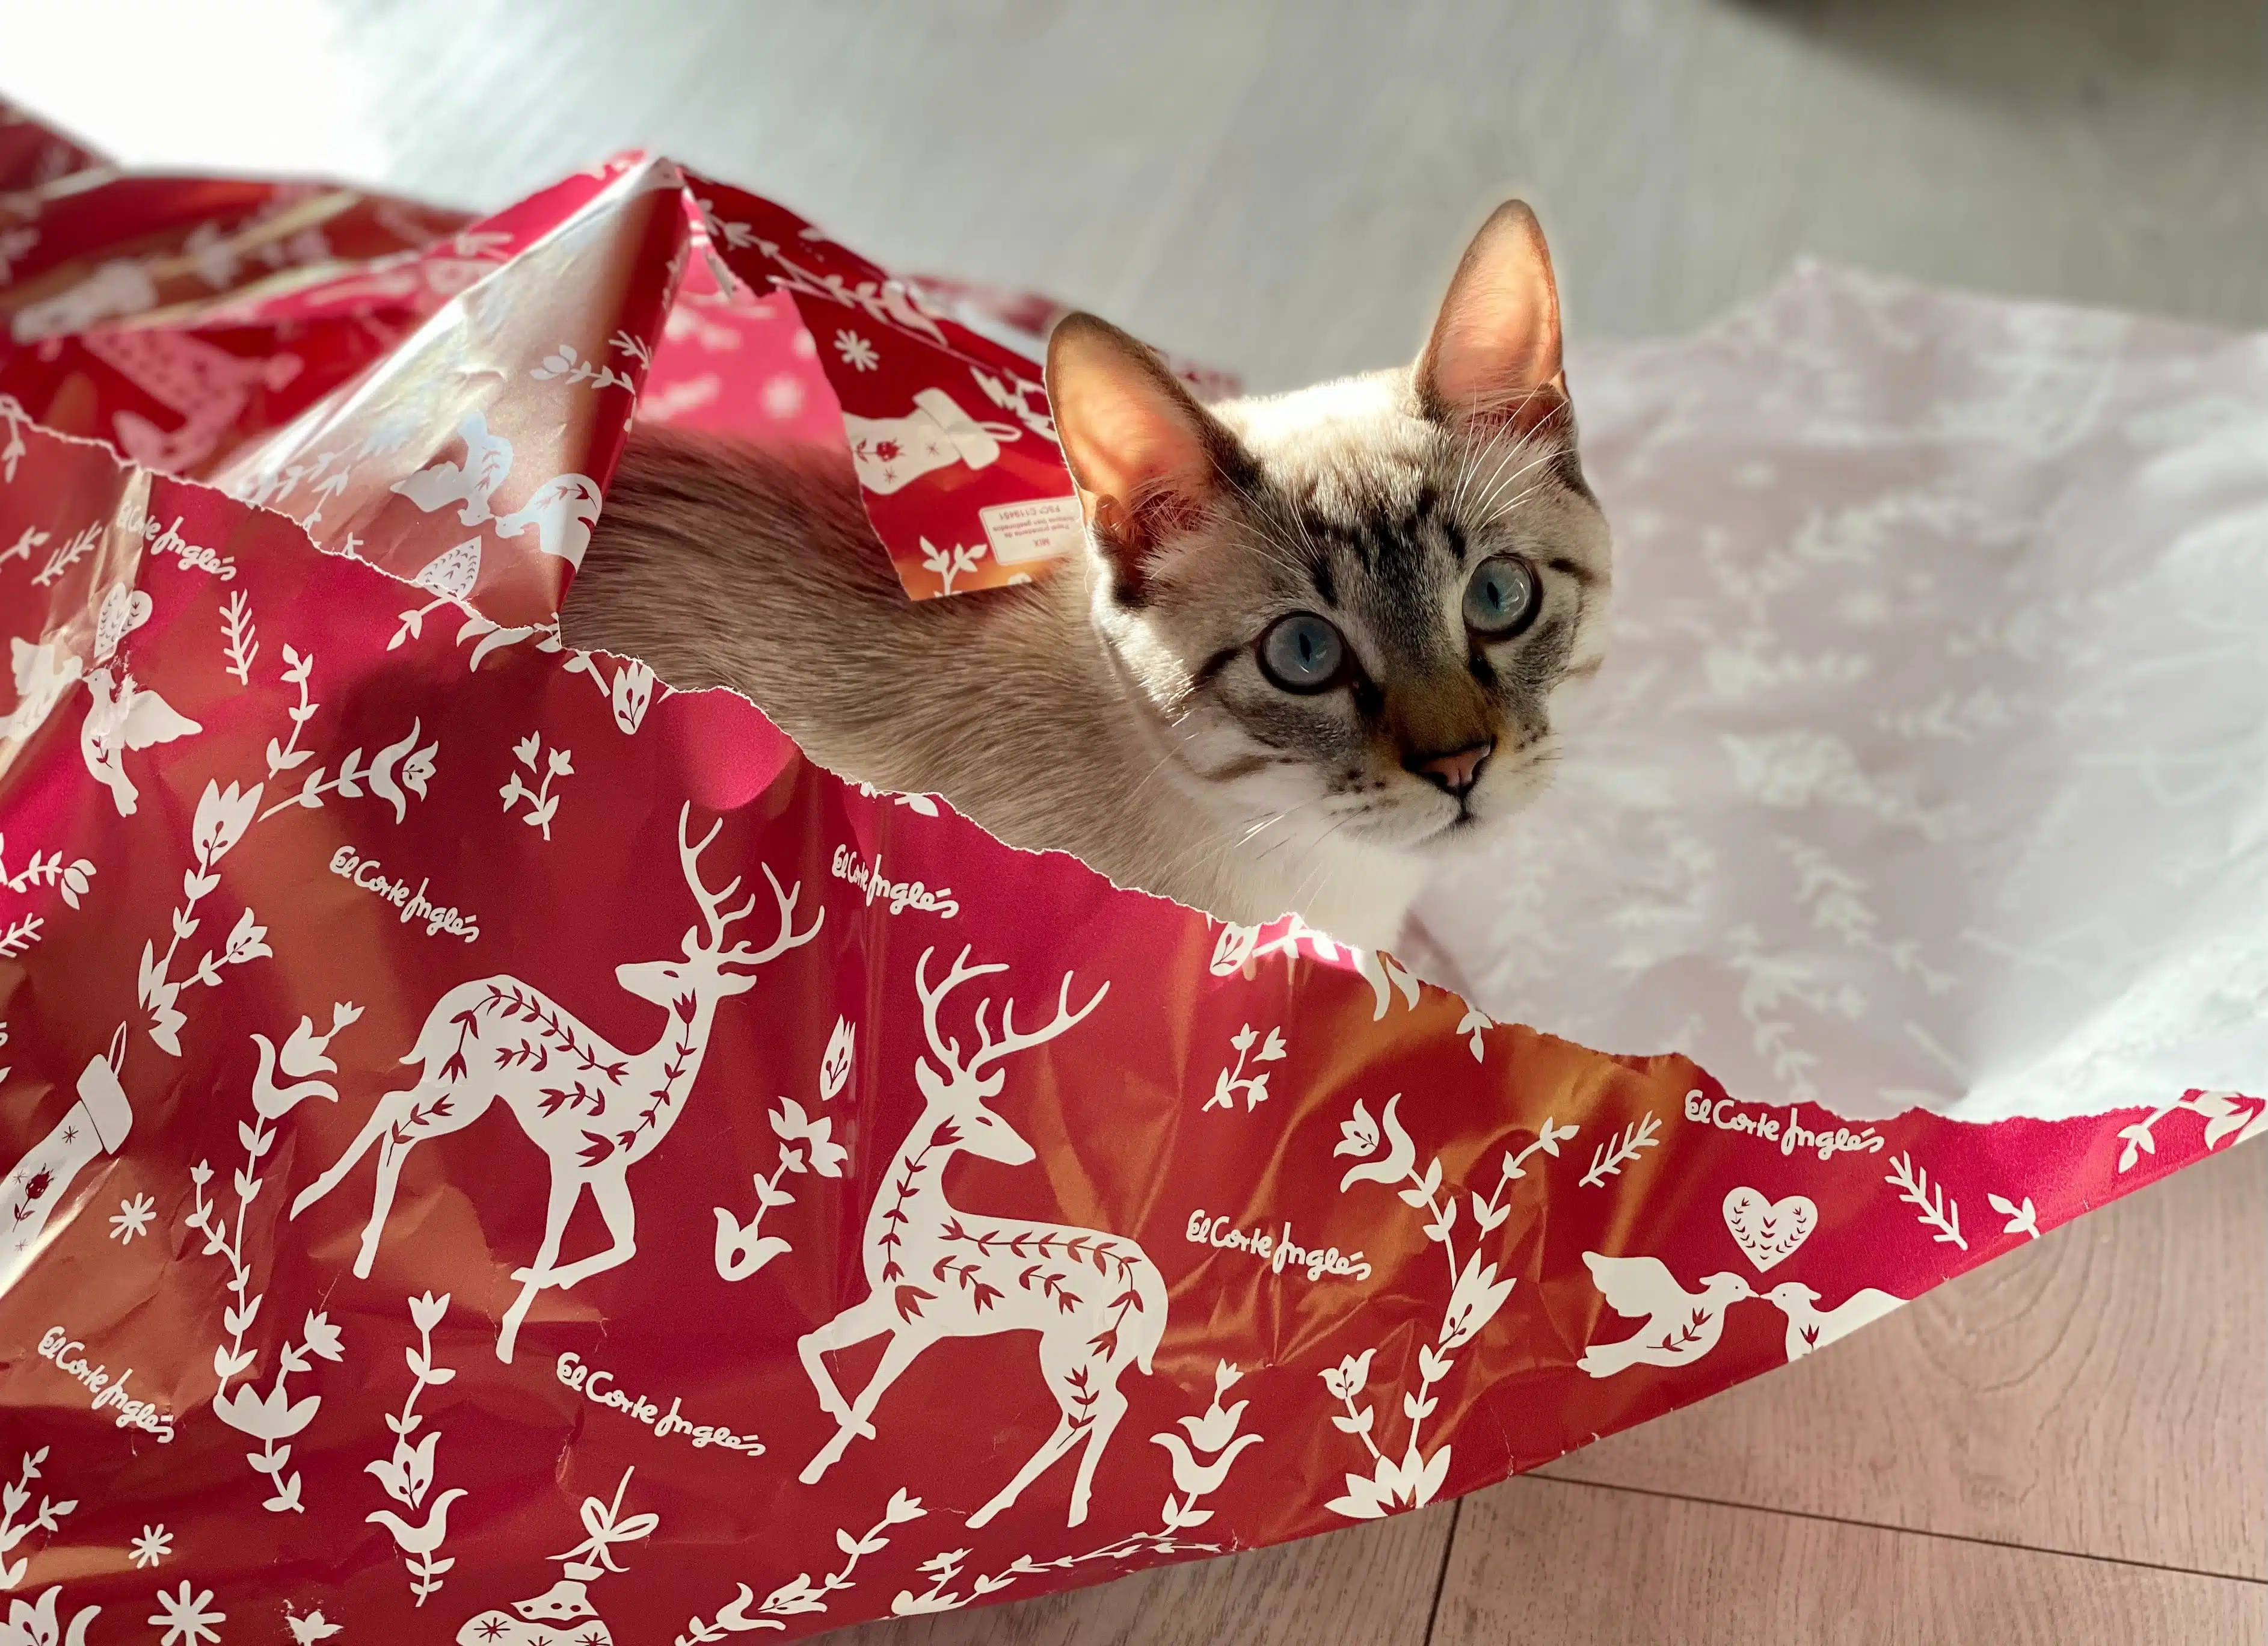 This Siamese with blue eyes looks up from within Christmas wrapping, wondering what other Christmas gifts ideas for pets its owner has